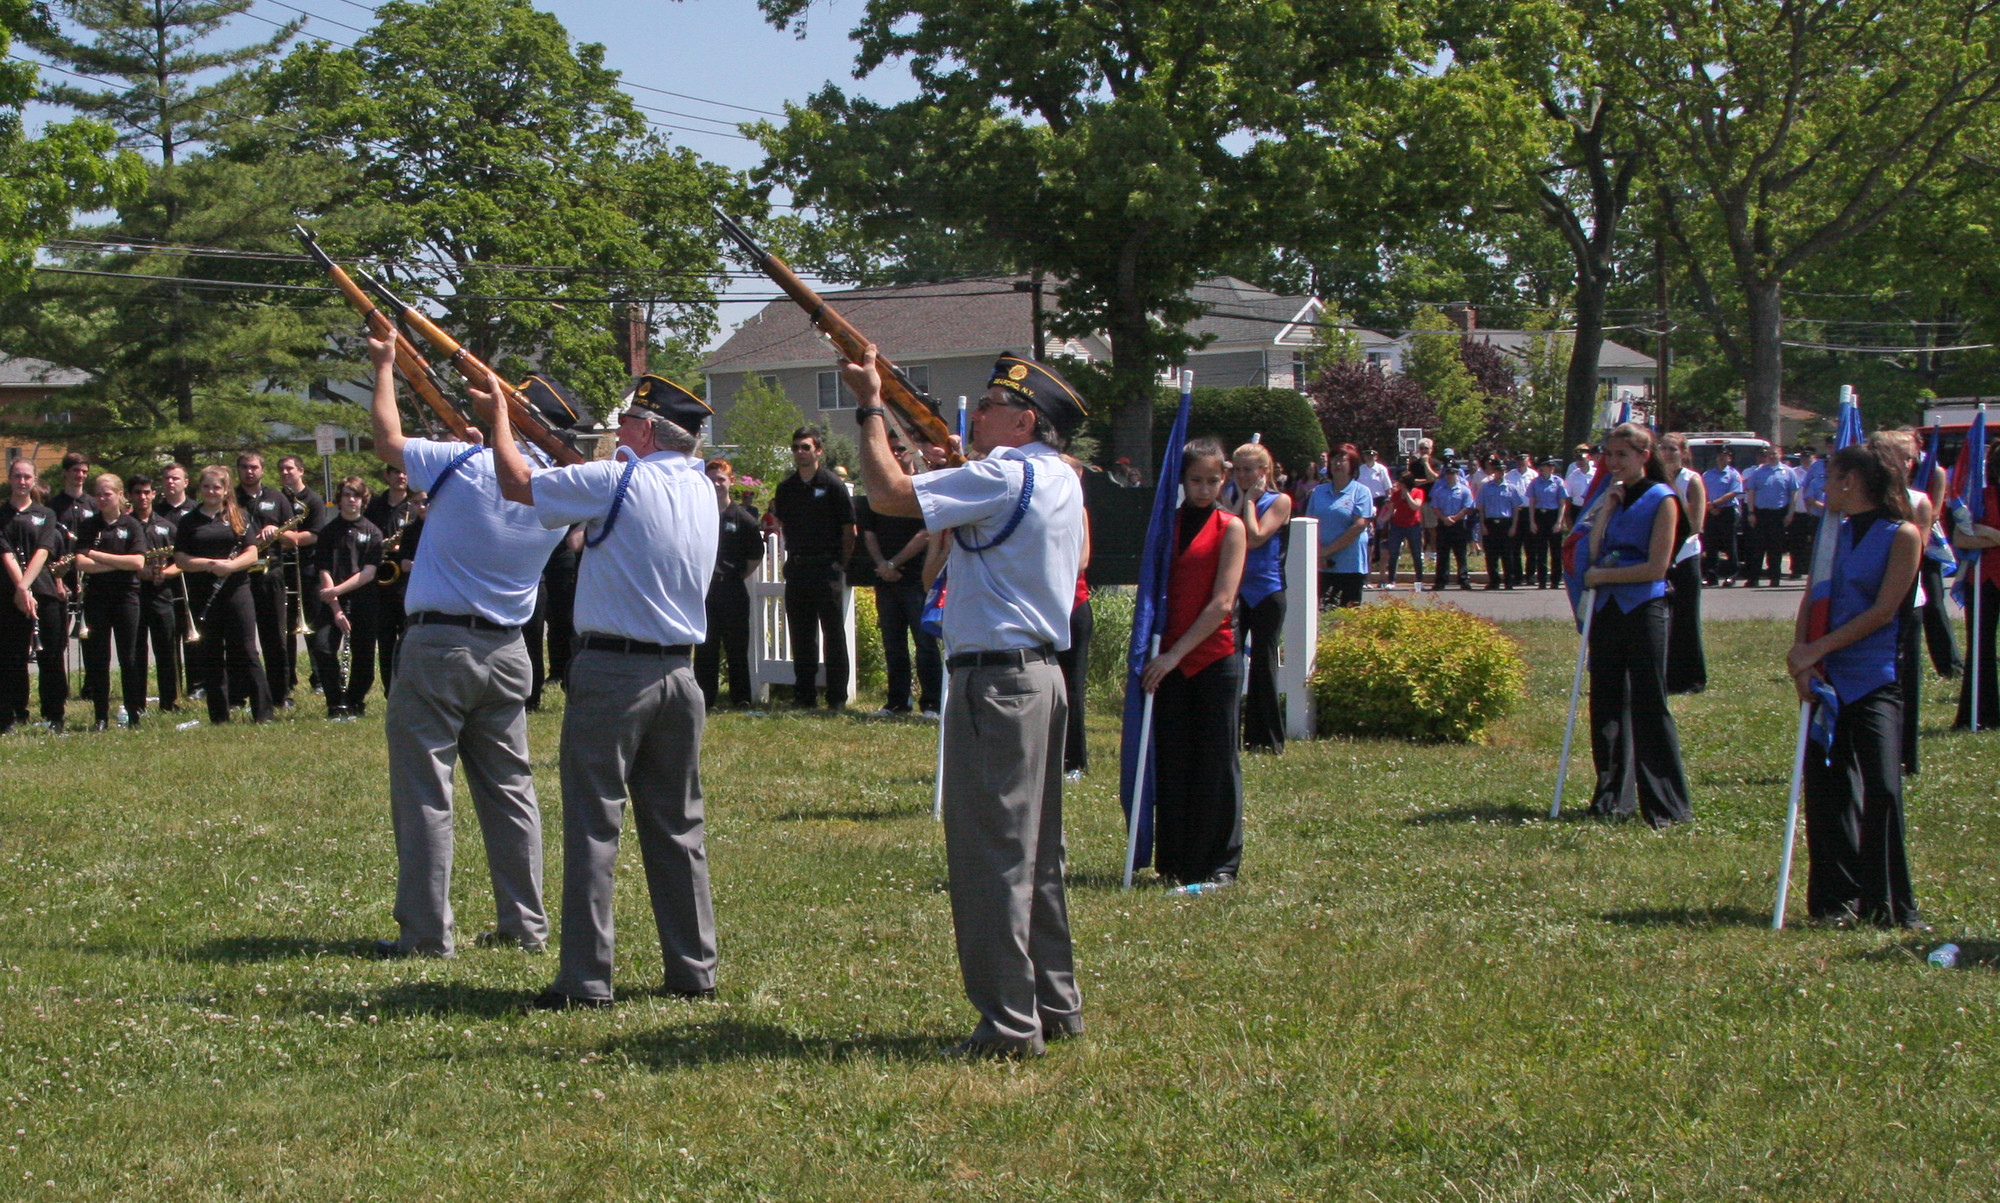 The American Legion Honor Guard fired three rounds.